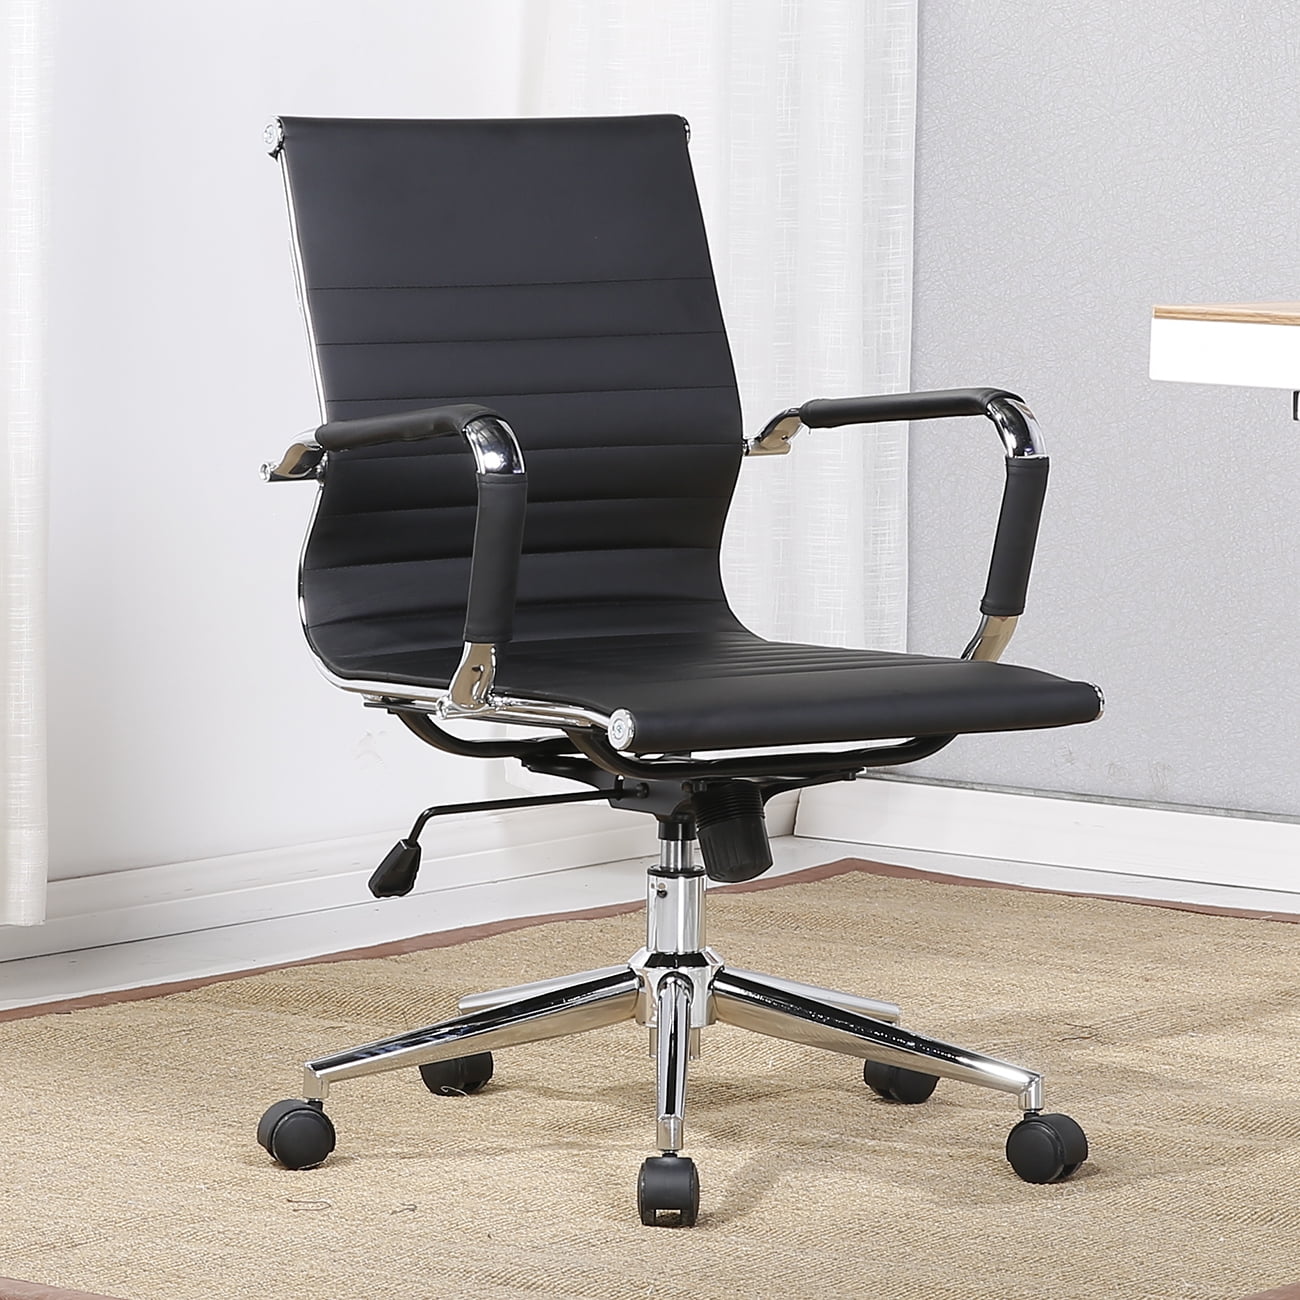 Belleze Mid-Back Faux Leather Adjustable Swivel Office Chair Soft